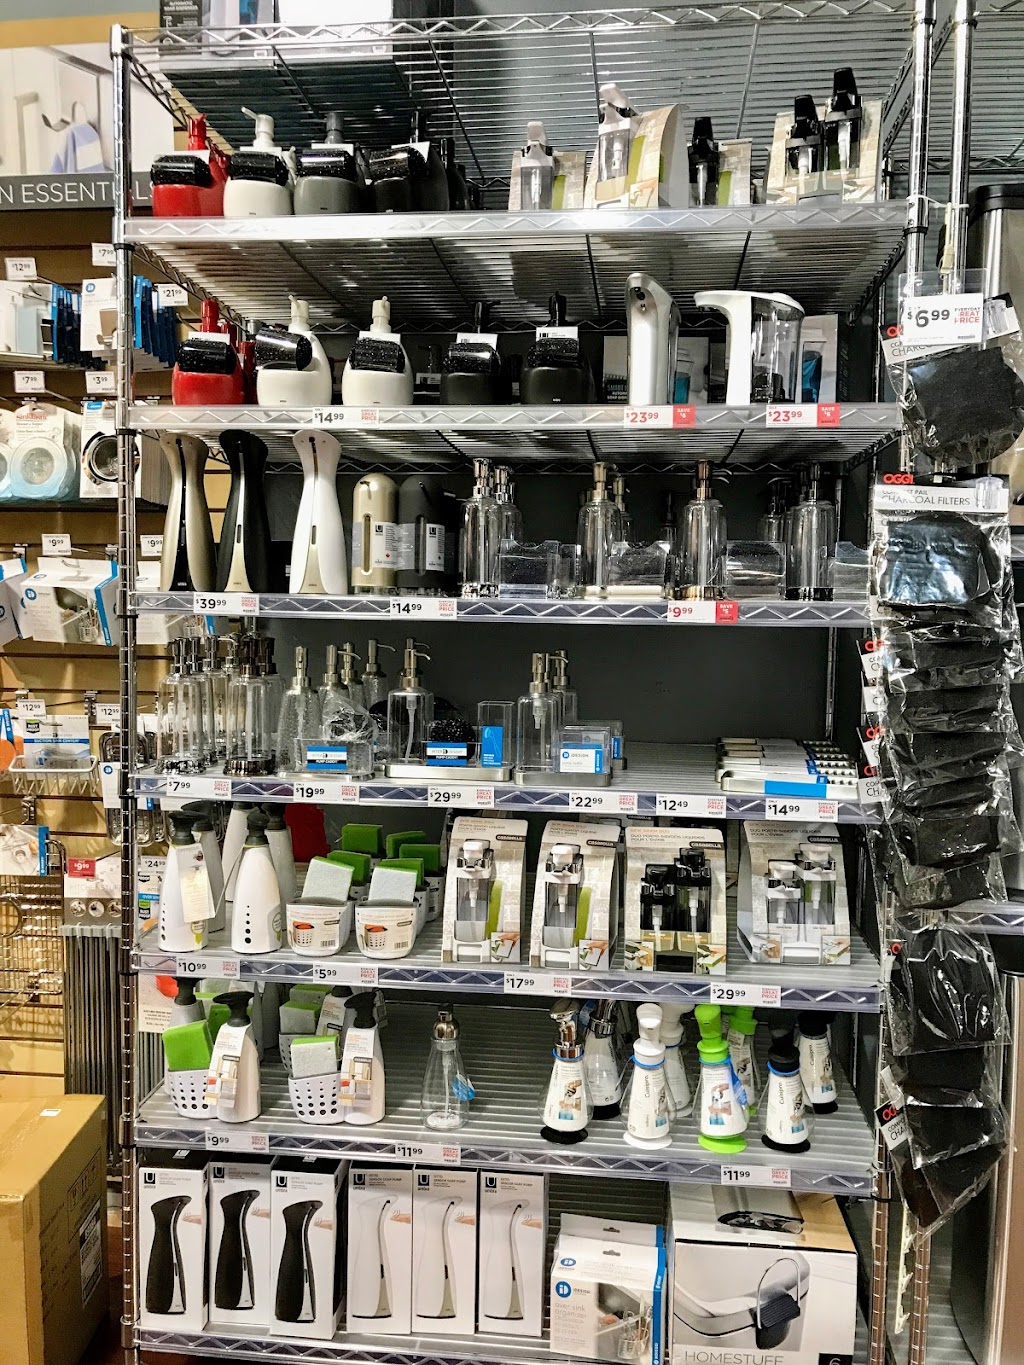 Kitchen Stuff Plus | 5100 Erin Mills Pkwy E123A, Mississauga, ON L5M 4Z5, Canada | Phone: (289) 814-1152